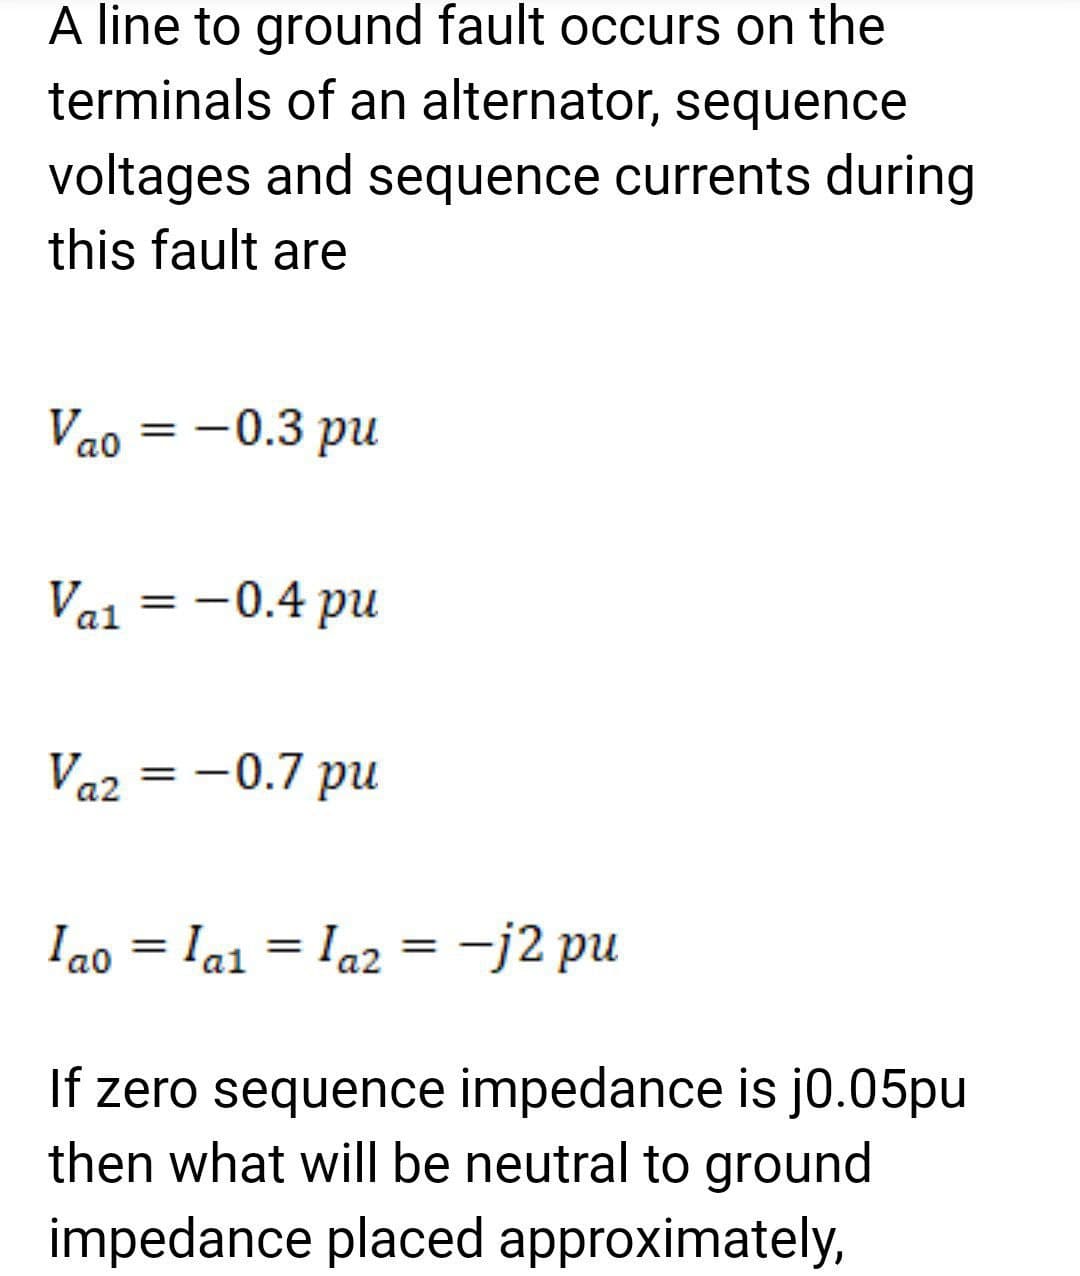 A line to ground fault occurs on the
terminals of an alternator, sequence
voltages and sequence currents during
this fault are
Vao = -0.3 pu
Val
= -0.4 pu
Va2 = -0.7 pu
Iao = 1a1 = 1a2 = -j2 pu
If zero sequence impedance is j0.05pu
then what will be neutral to ground
impedance placed approximately,